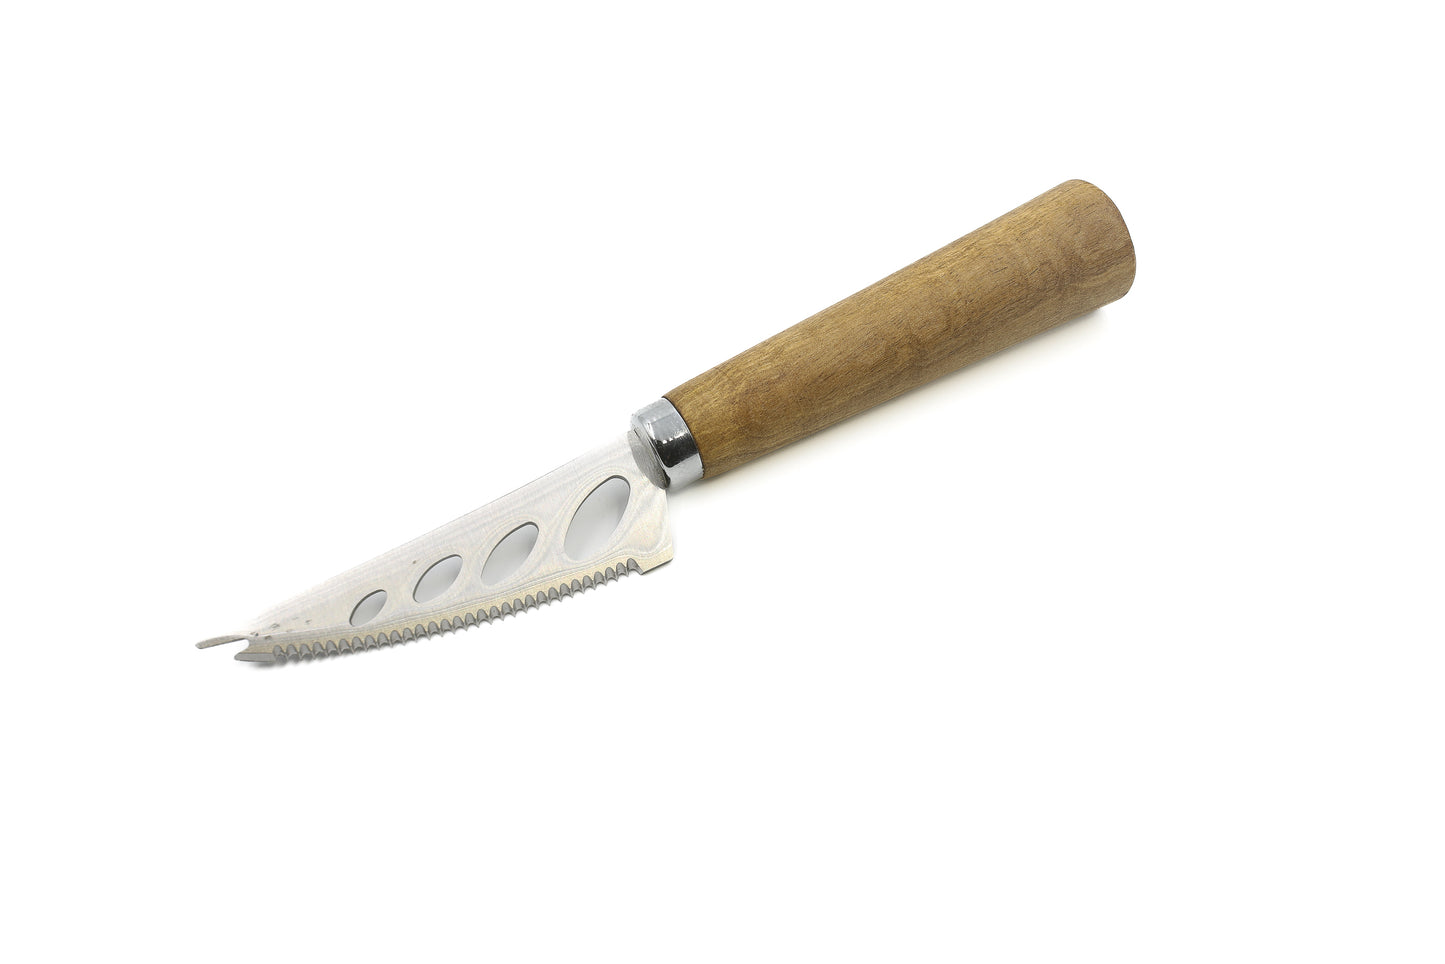 Artisan-crafted olive wood cheese knife assortment, a versatile addition to your table